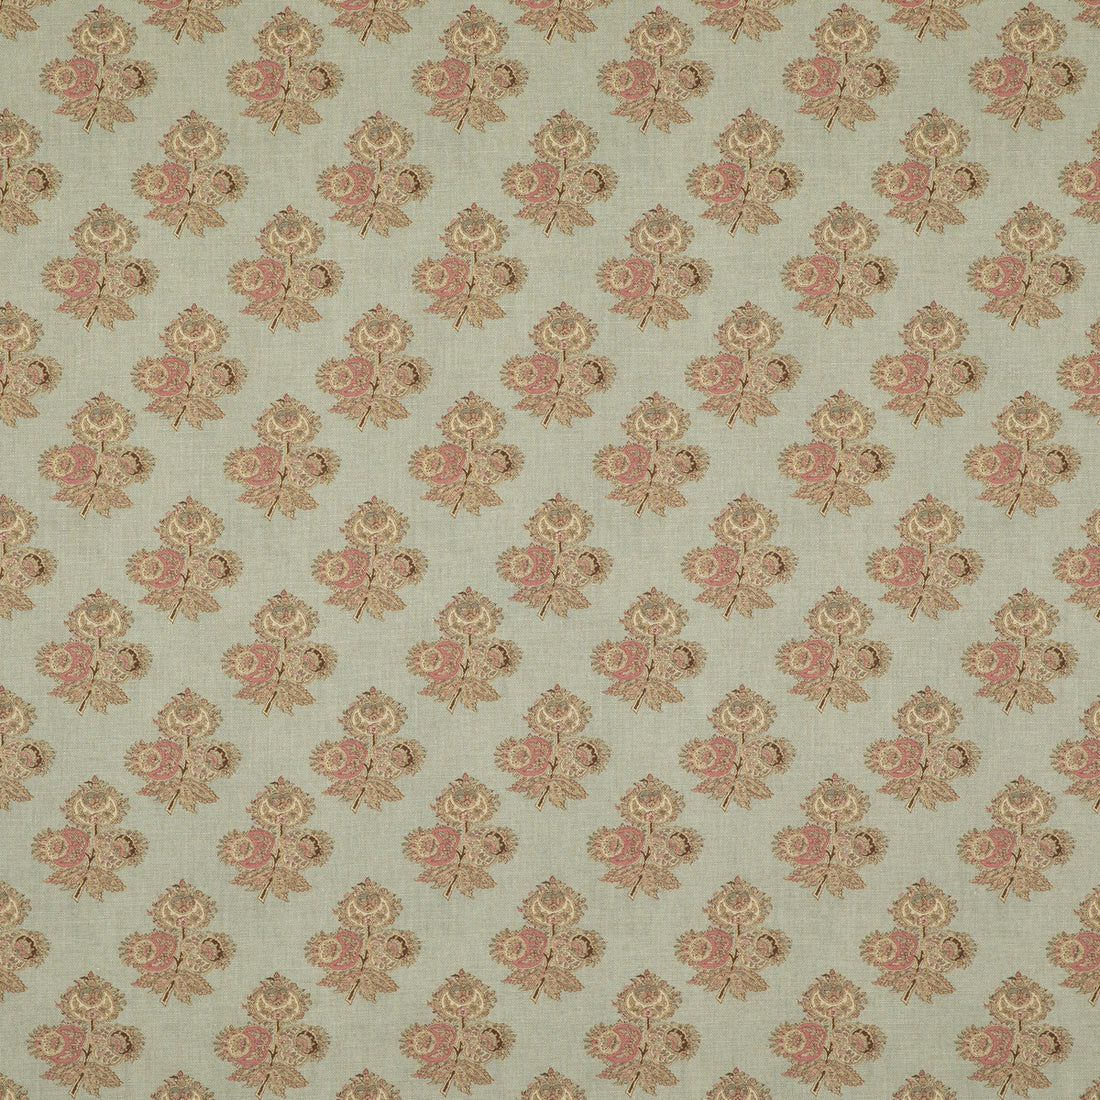 Poppy Paisley fabric in aqua color - pattern BP10823.5.0 - by G P &amp; J Baker in the Coromandel Small Prints collection